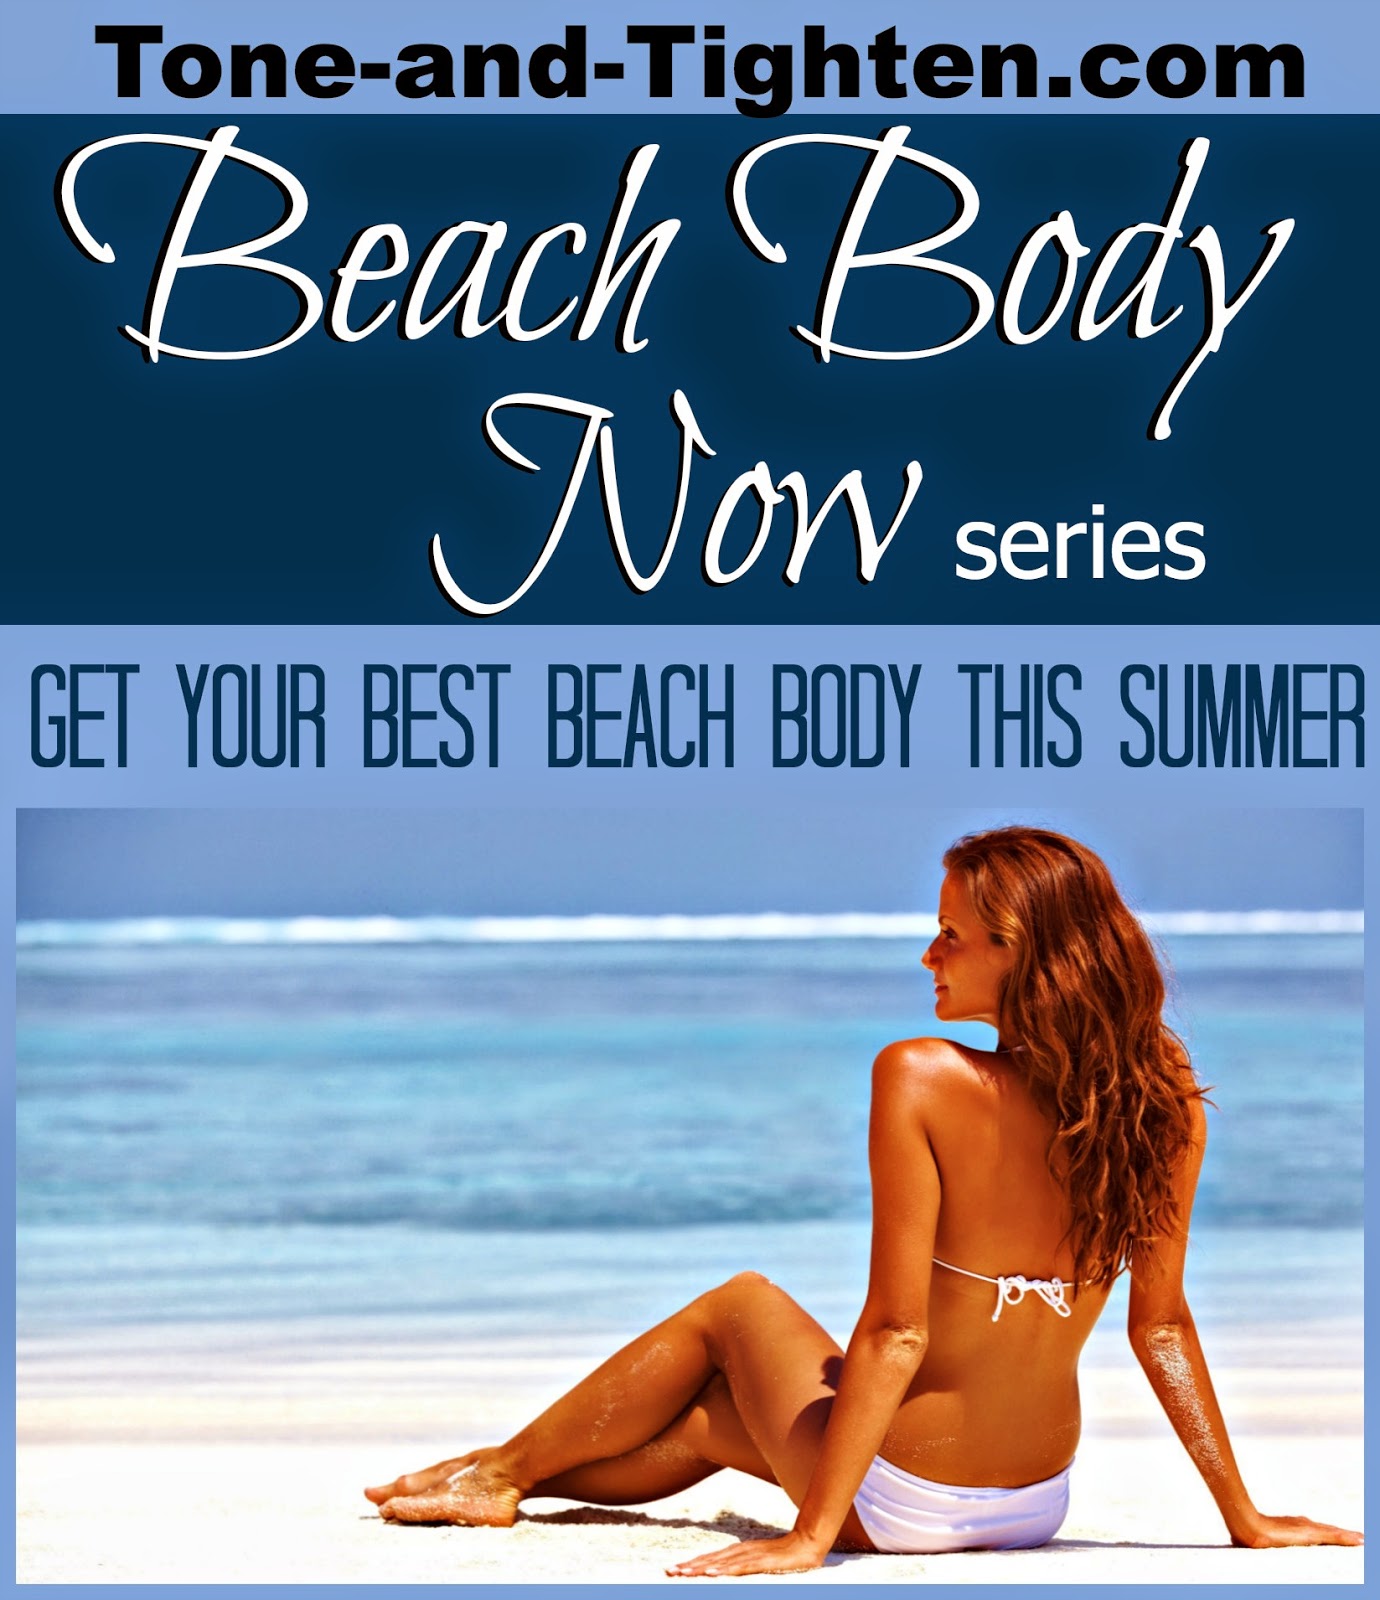 “Beach Body Now” Week 3 – Get The Body Of Your Dreams This Summer!